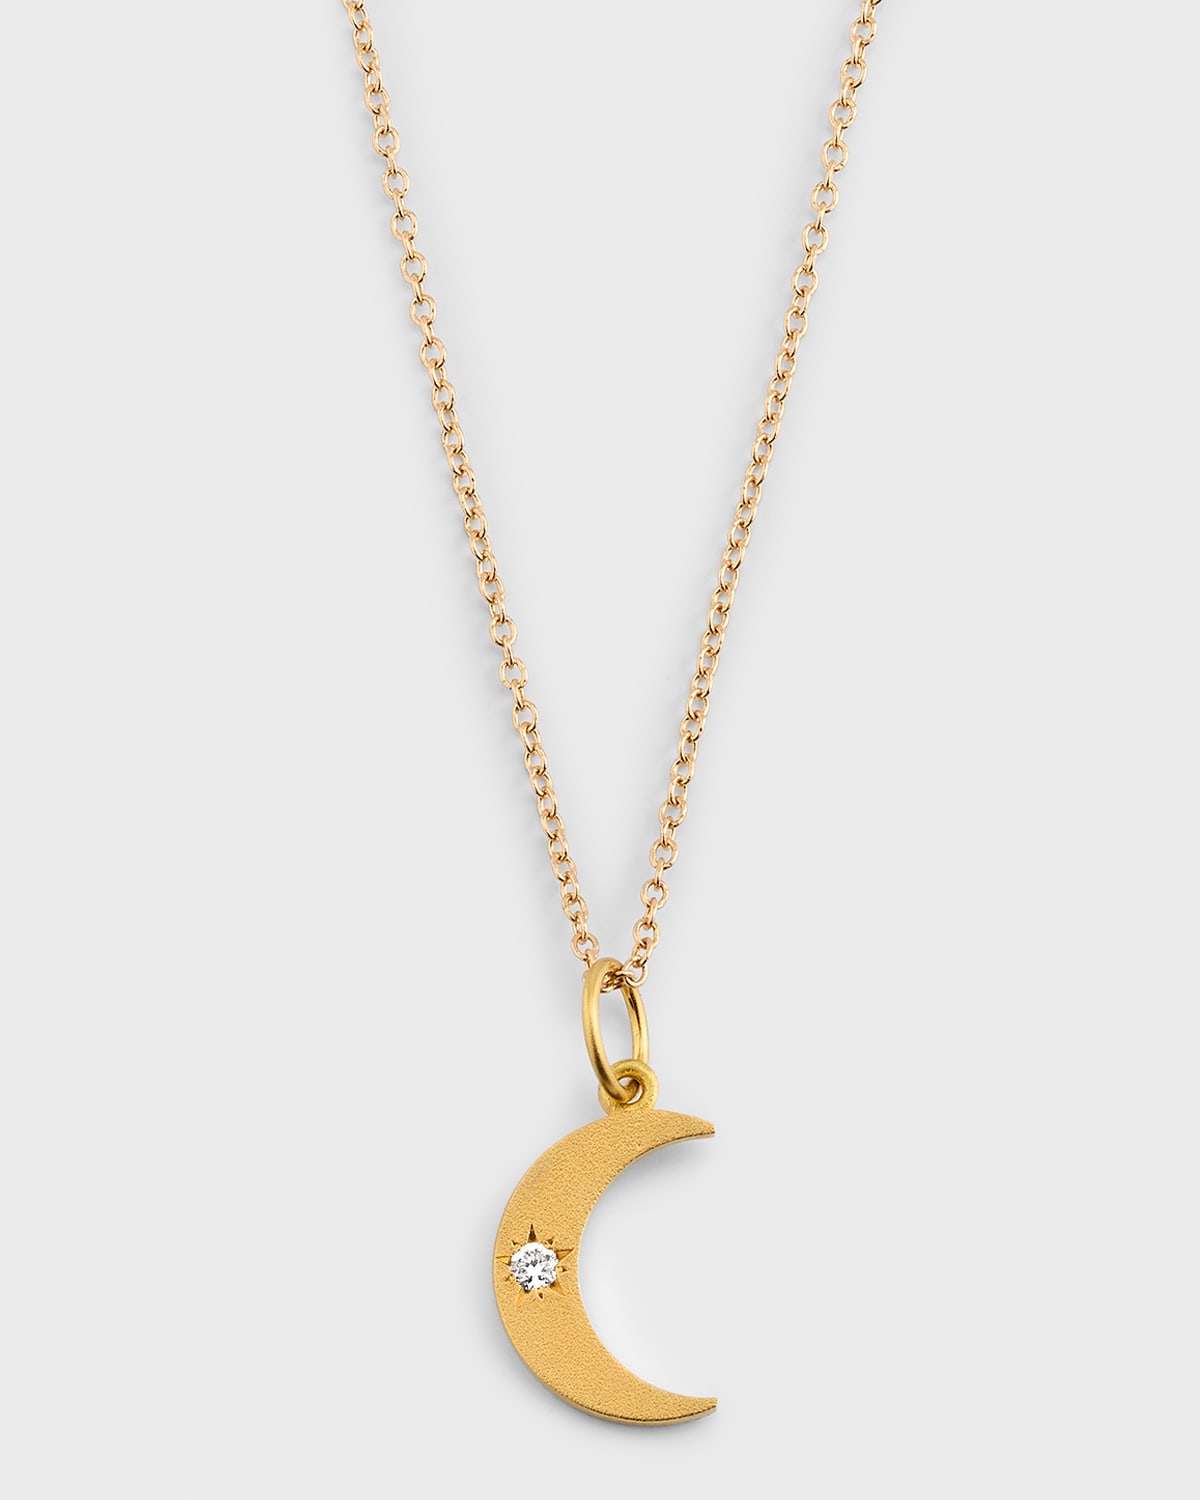 18K Yellow Gold Small Crescent Moon Phase Diamond Pendant Necklace